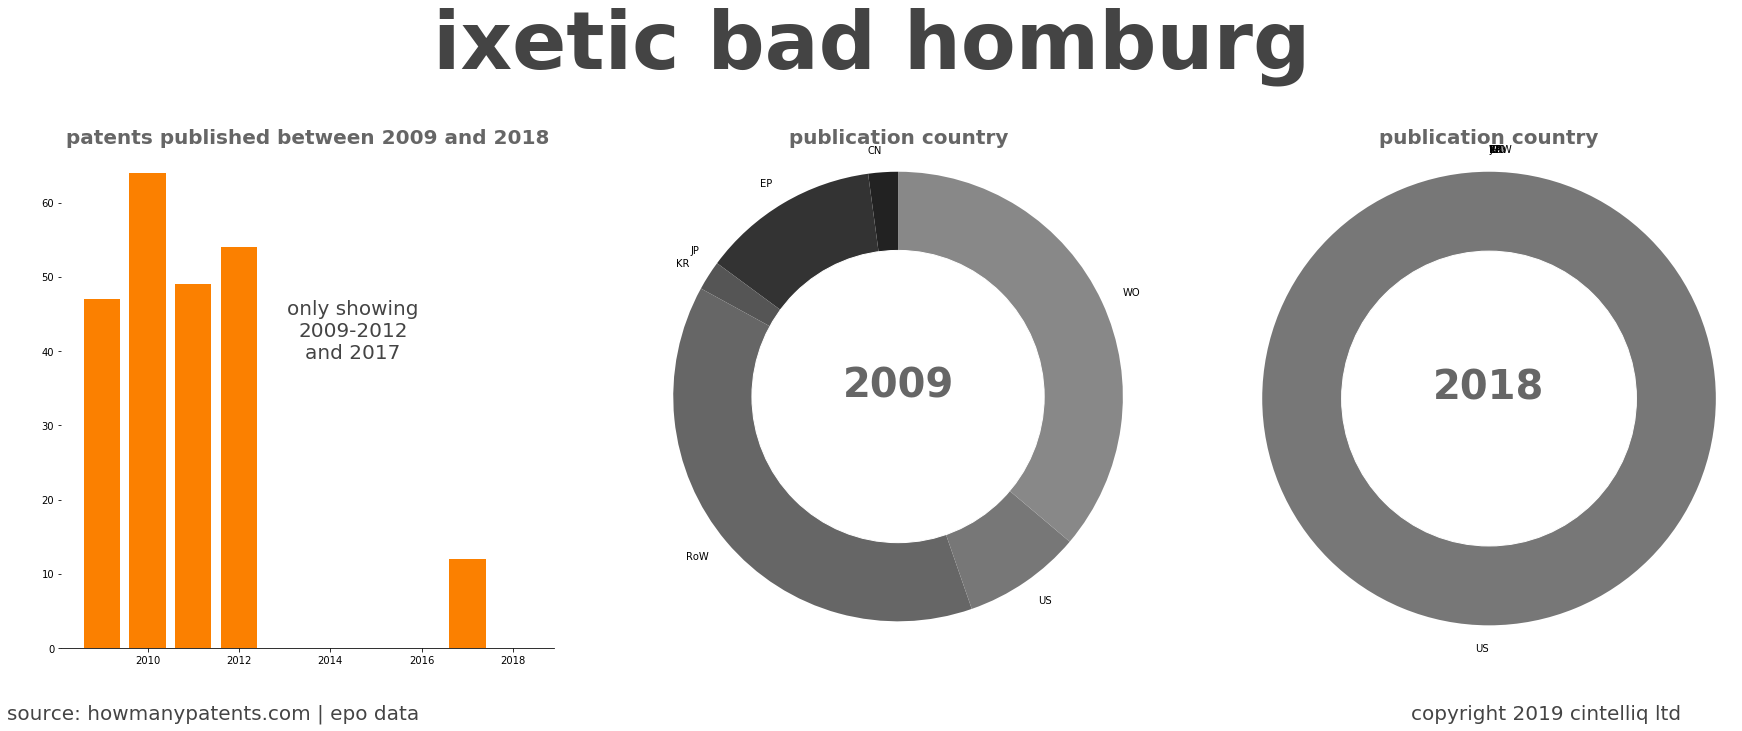 summary of patents for Ixetic Bad Homburg